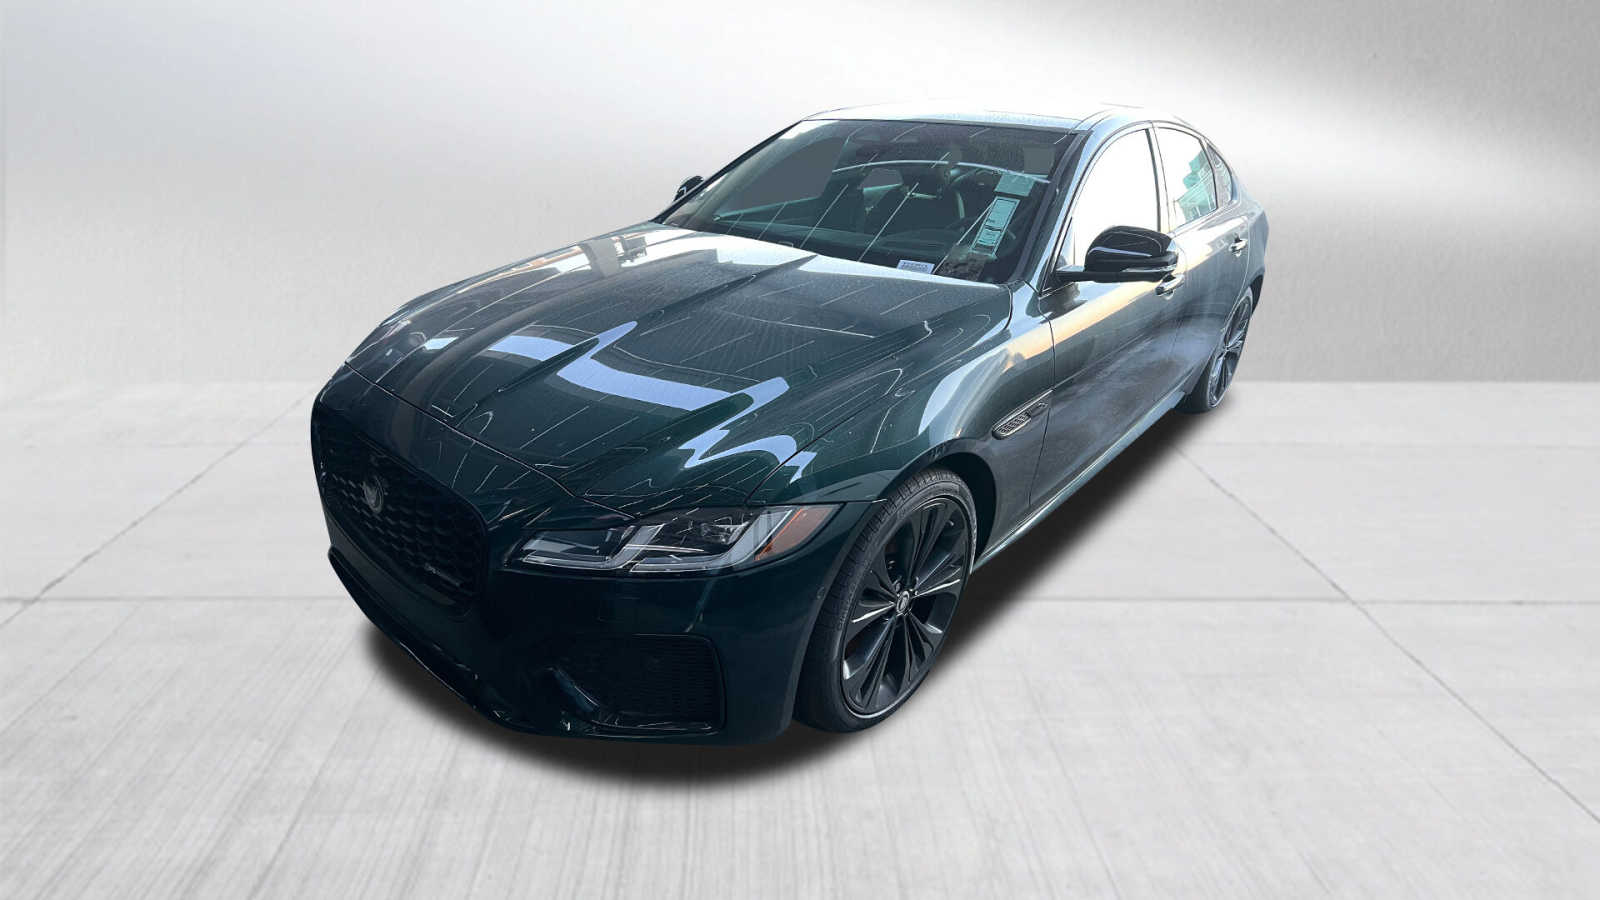 Used Jaguar XF: Specifications and Equipment